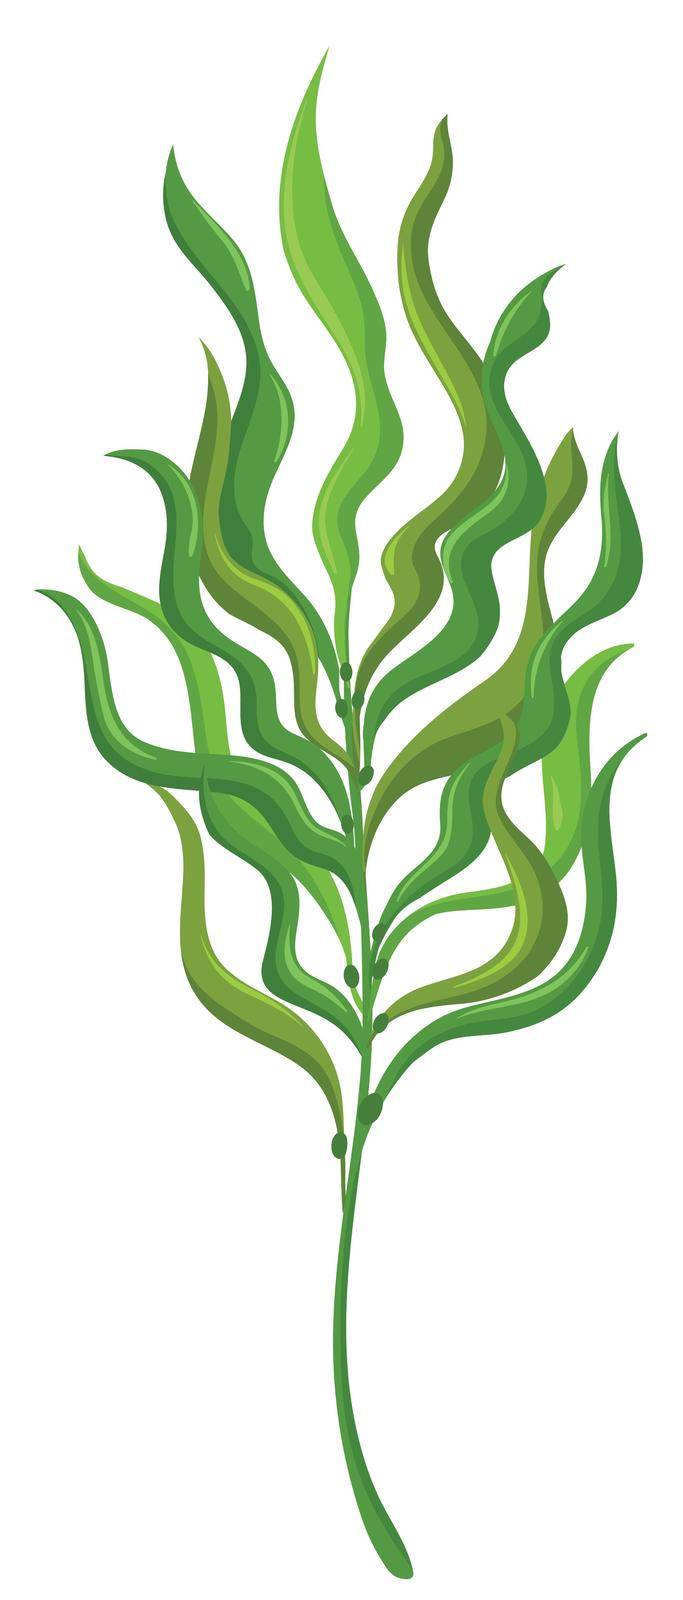 Plant with long leaves illustration